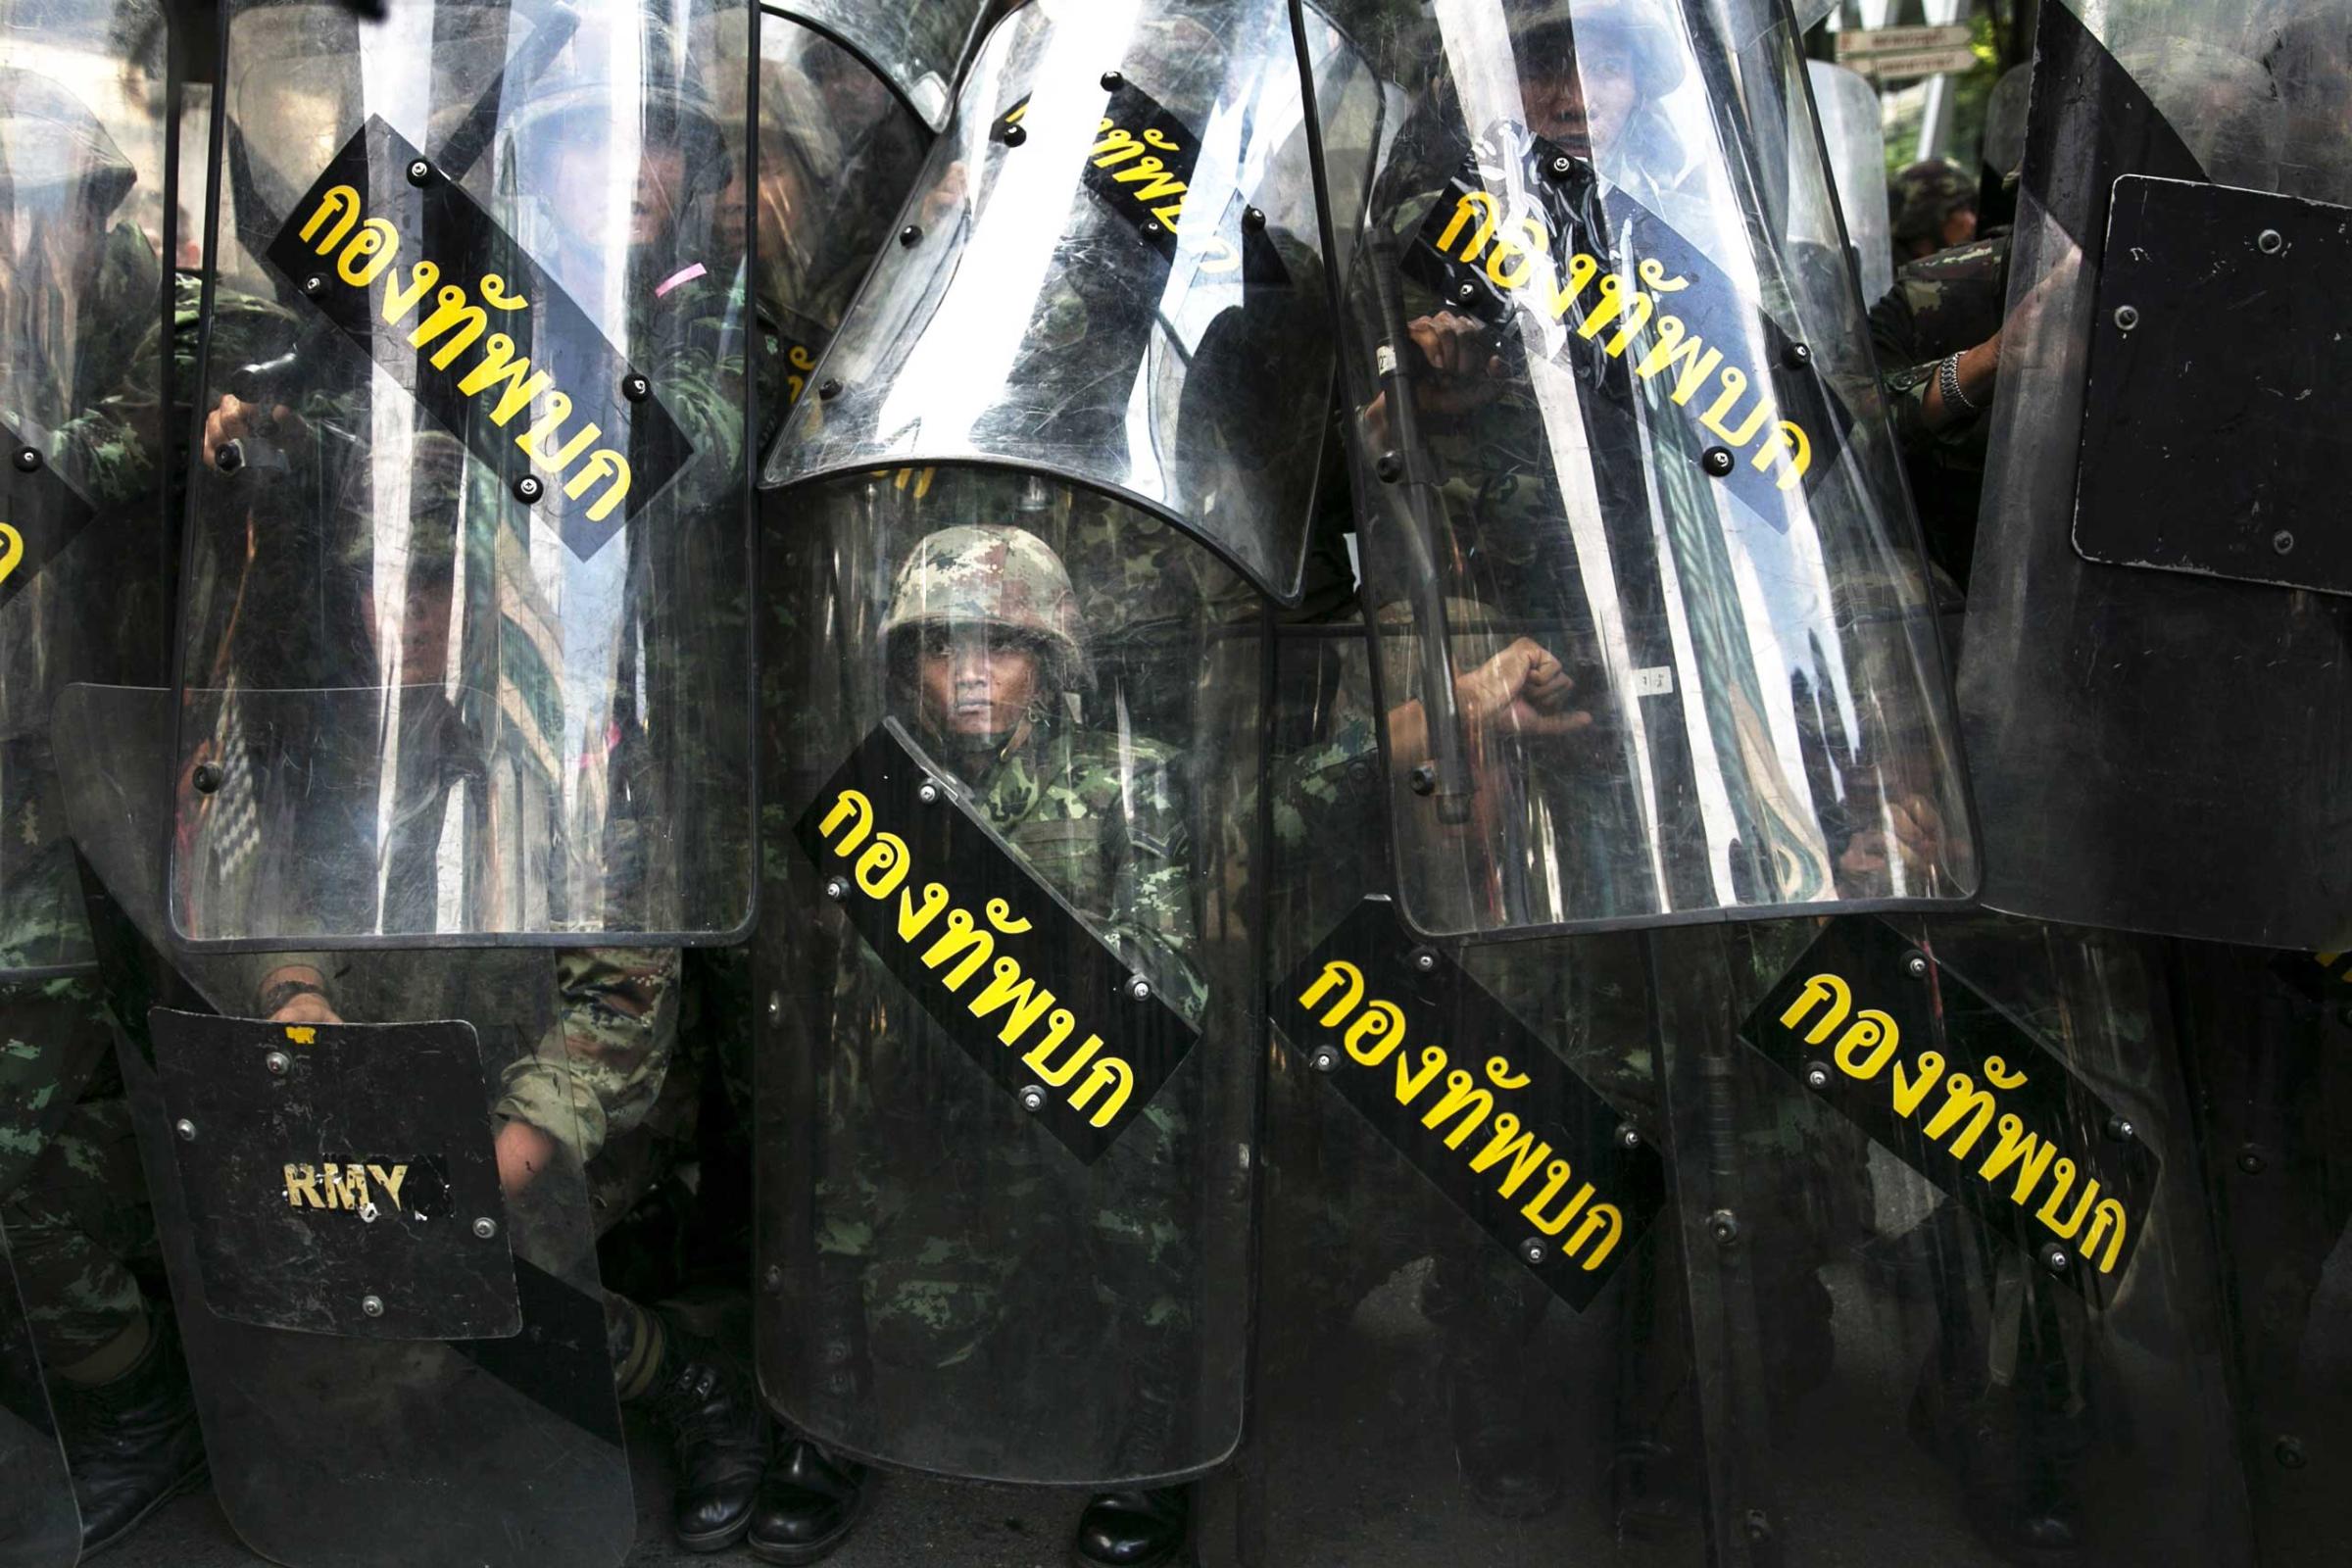 Thai military stand behind their riot shields as protesters threaten them during an anti-coup protest on the third day of the military coup May 25, 2014 in Bangkok, Thailand.